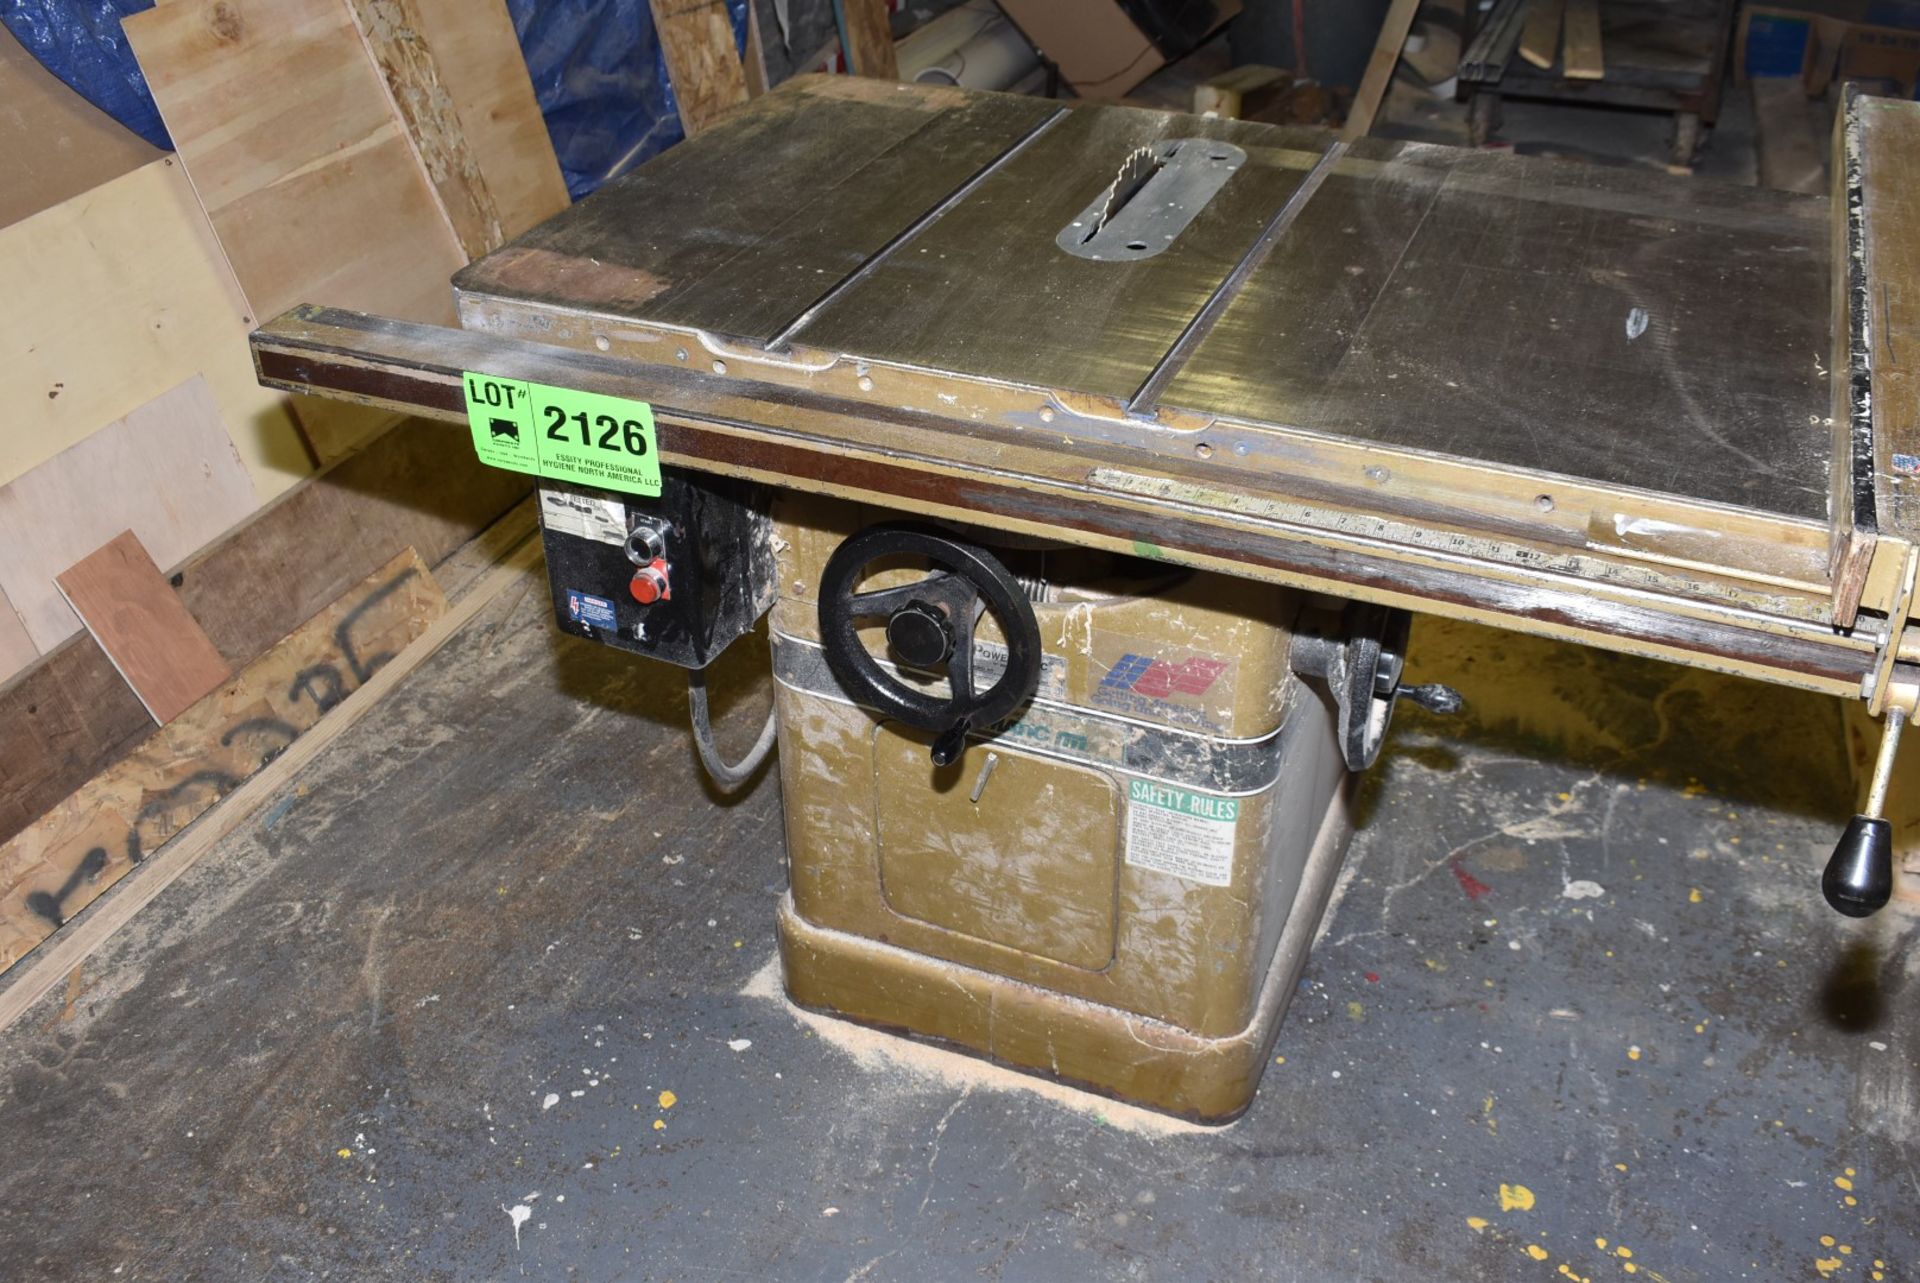 POWERMATIC 66 TABLE SAW WITH 12" BLADE, S/N 92661879 (CI) [RIGGING FEES FOR LOT #2126 - $200 USD - Image 3 of 4